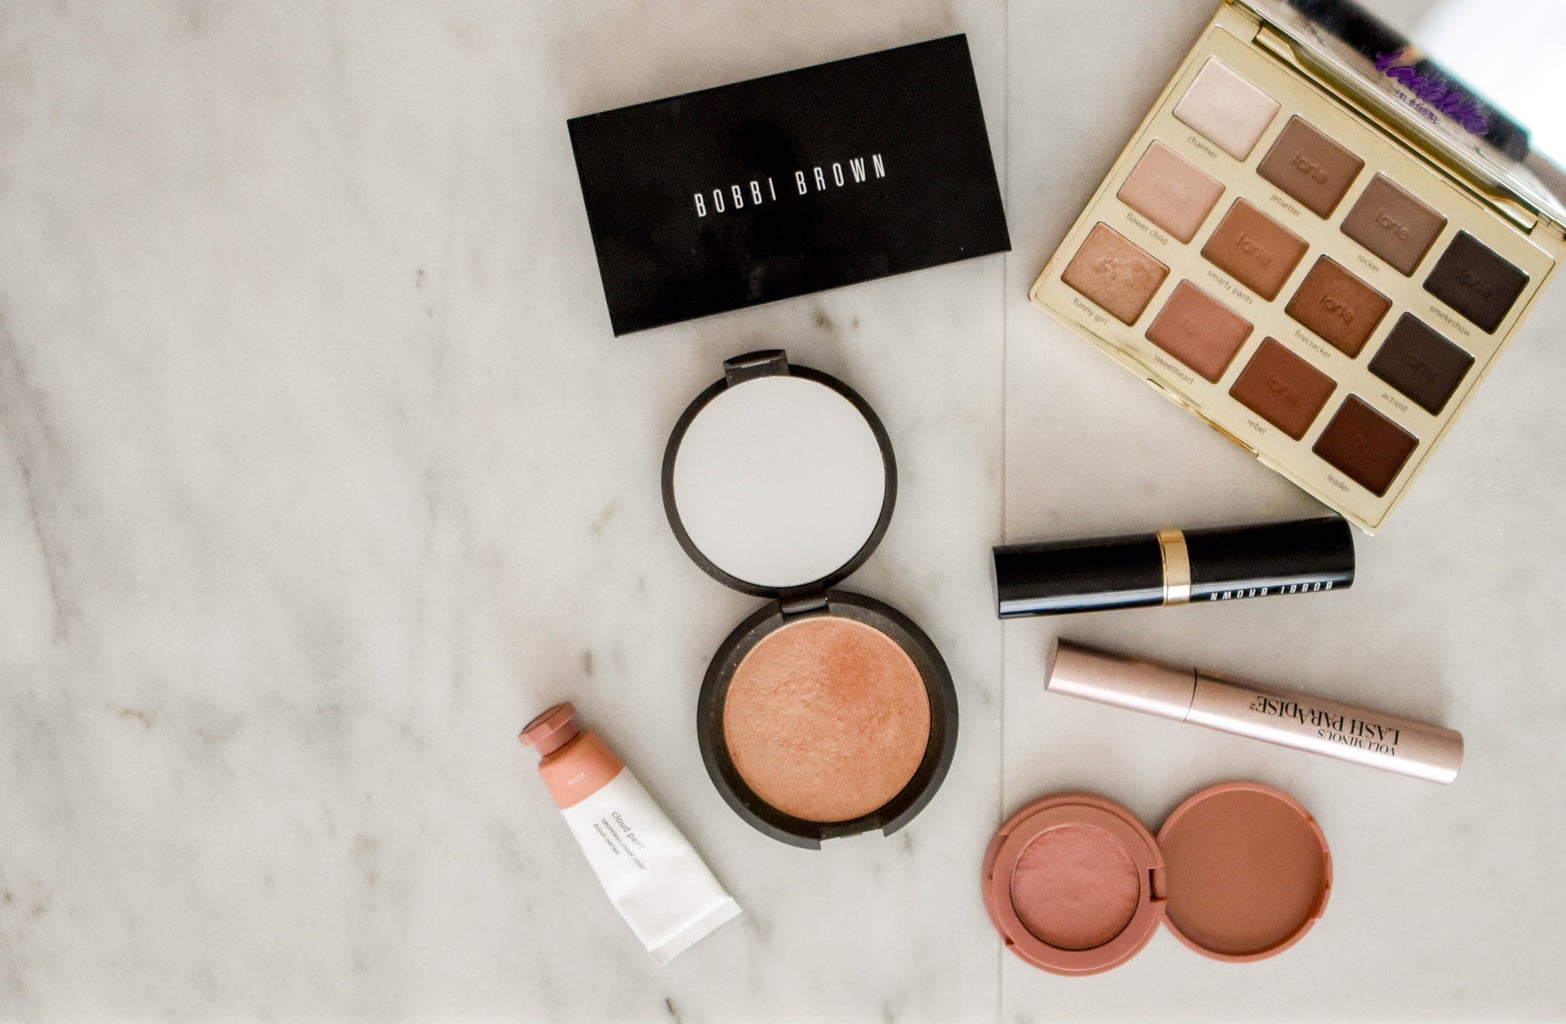 Bobbi Brown make-up on a marble table